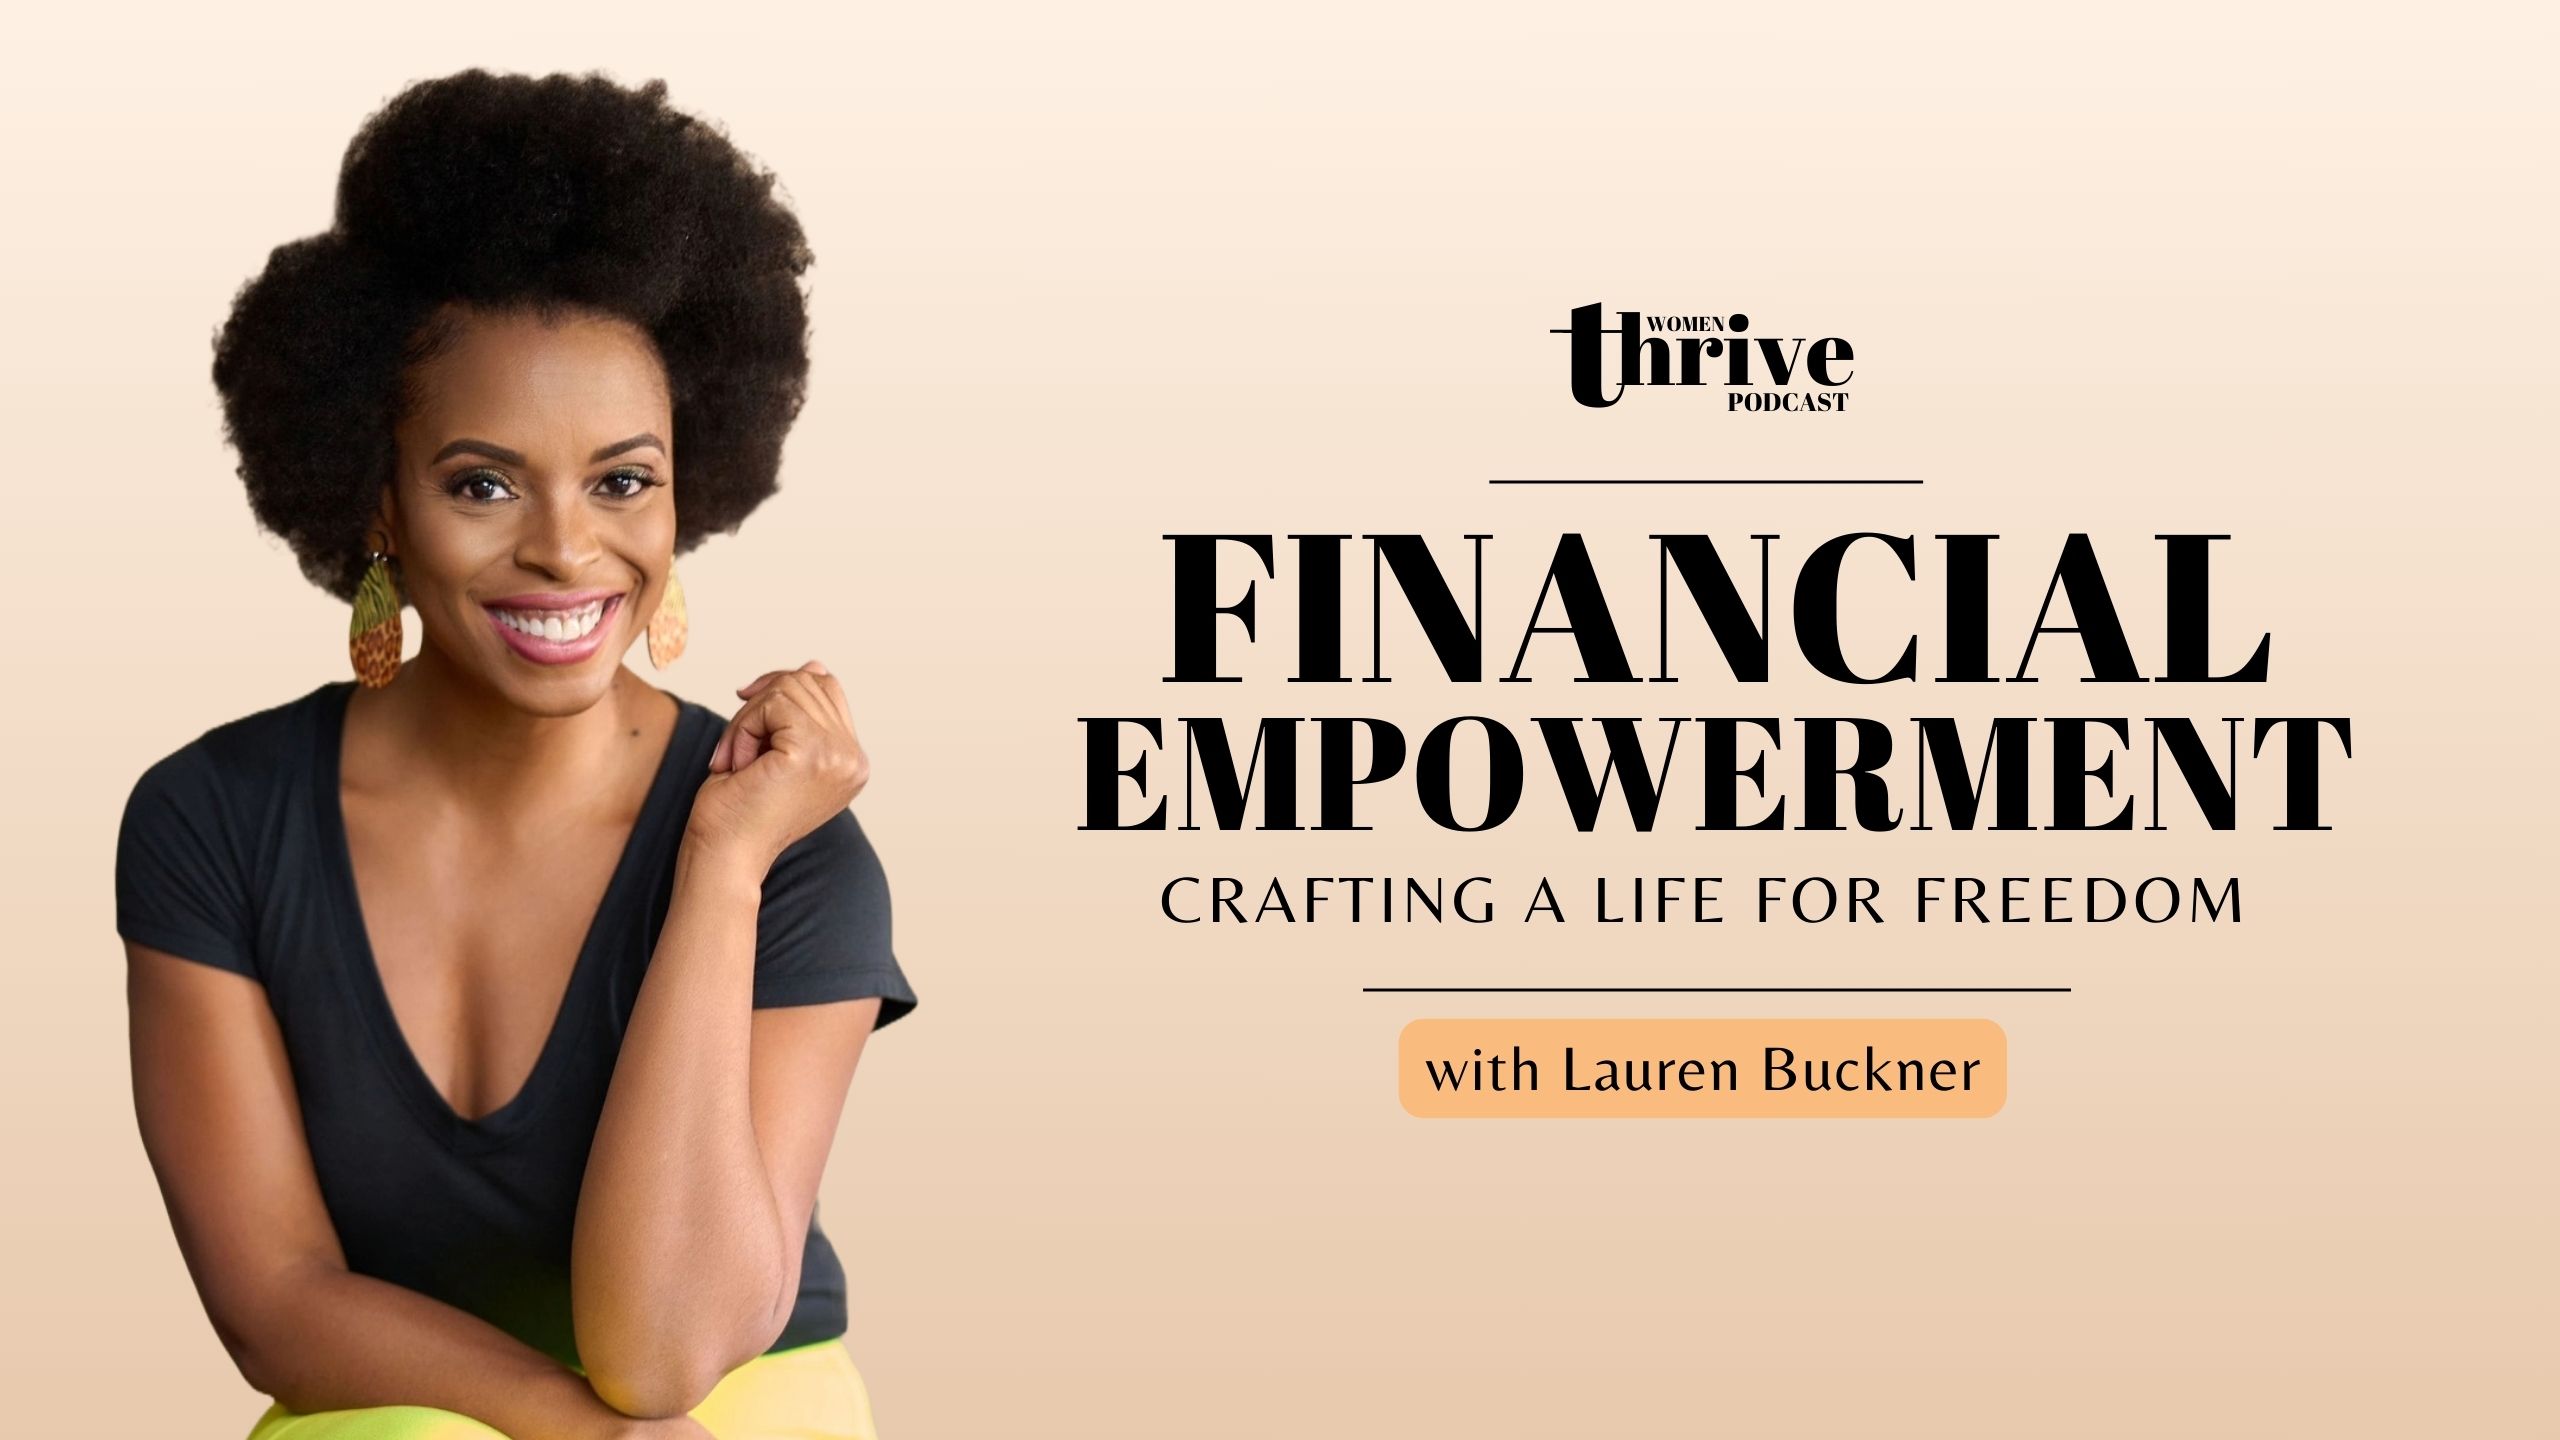 Financial Empowerment: Crafting a Life for Freedom with Lauren Buckner